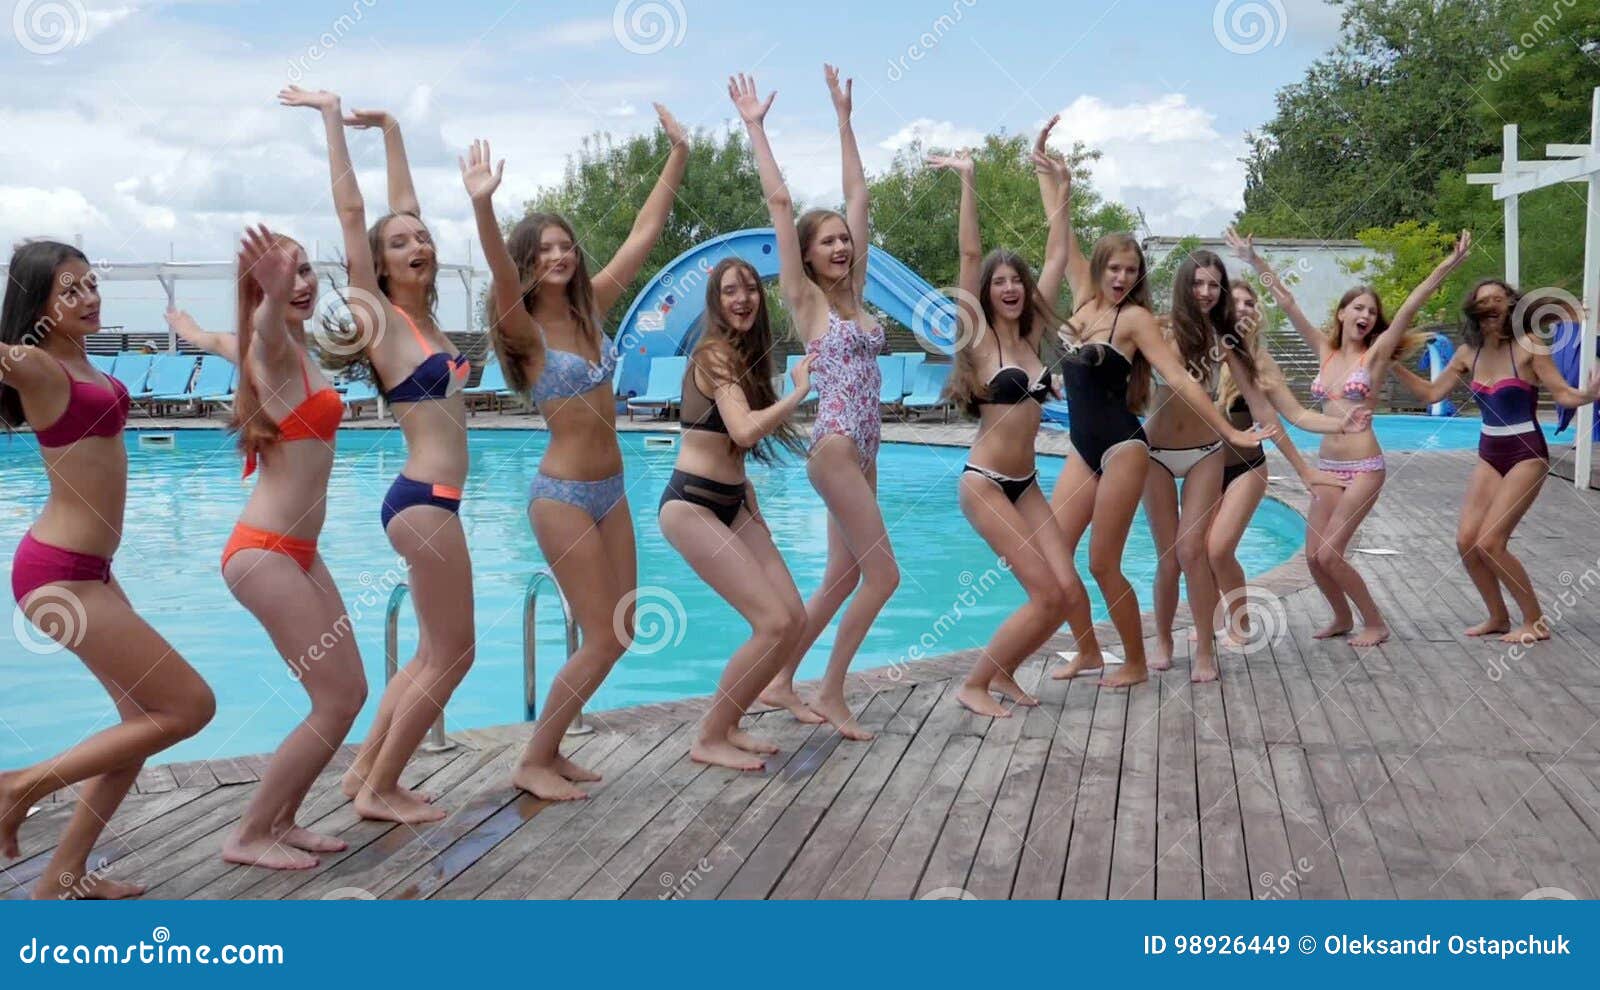 Pool Party, Slender Girls in Bathing Suits Jumping Near Swimming